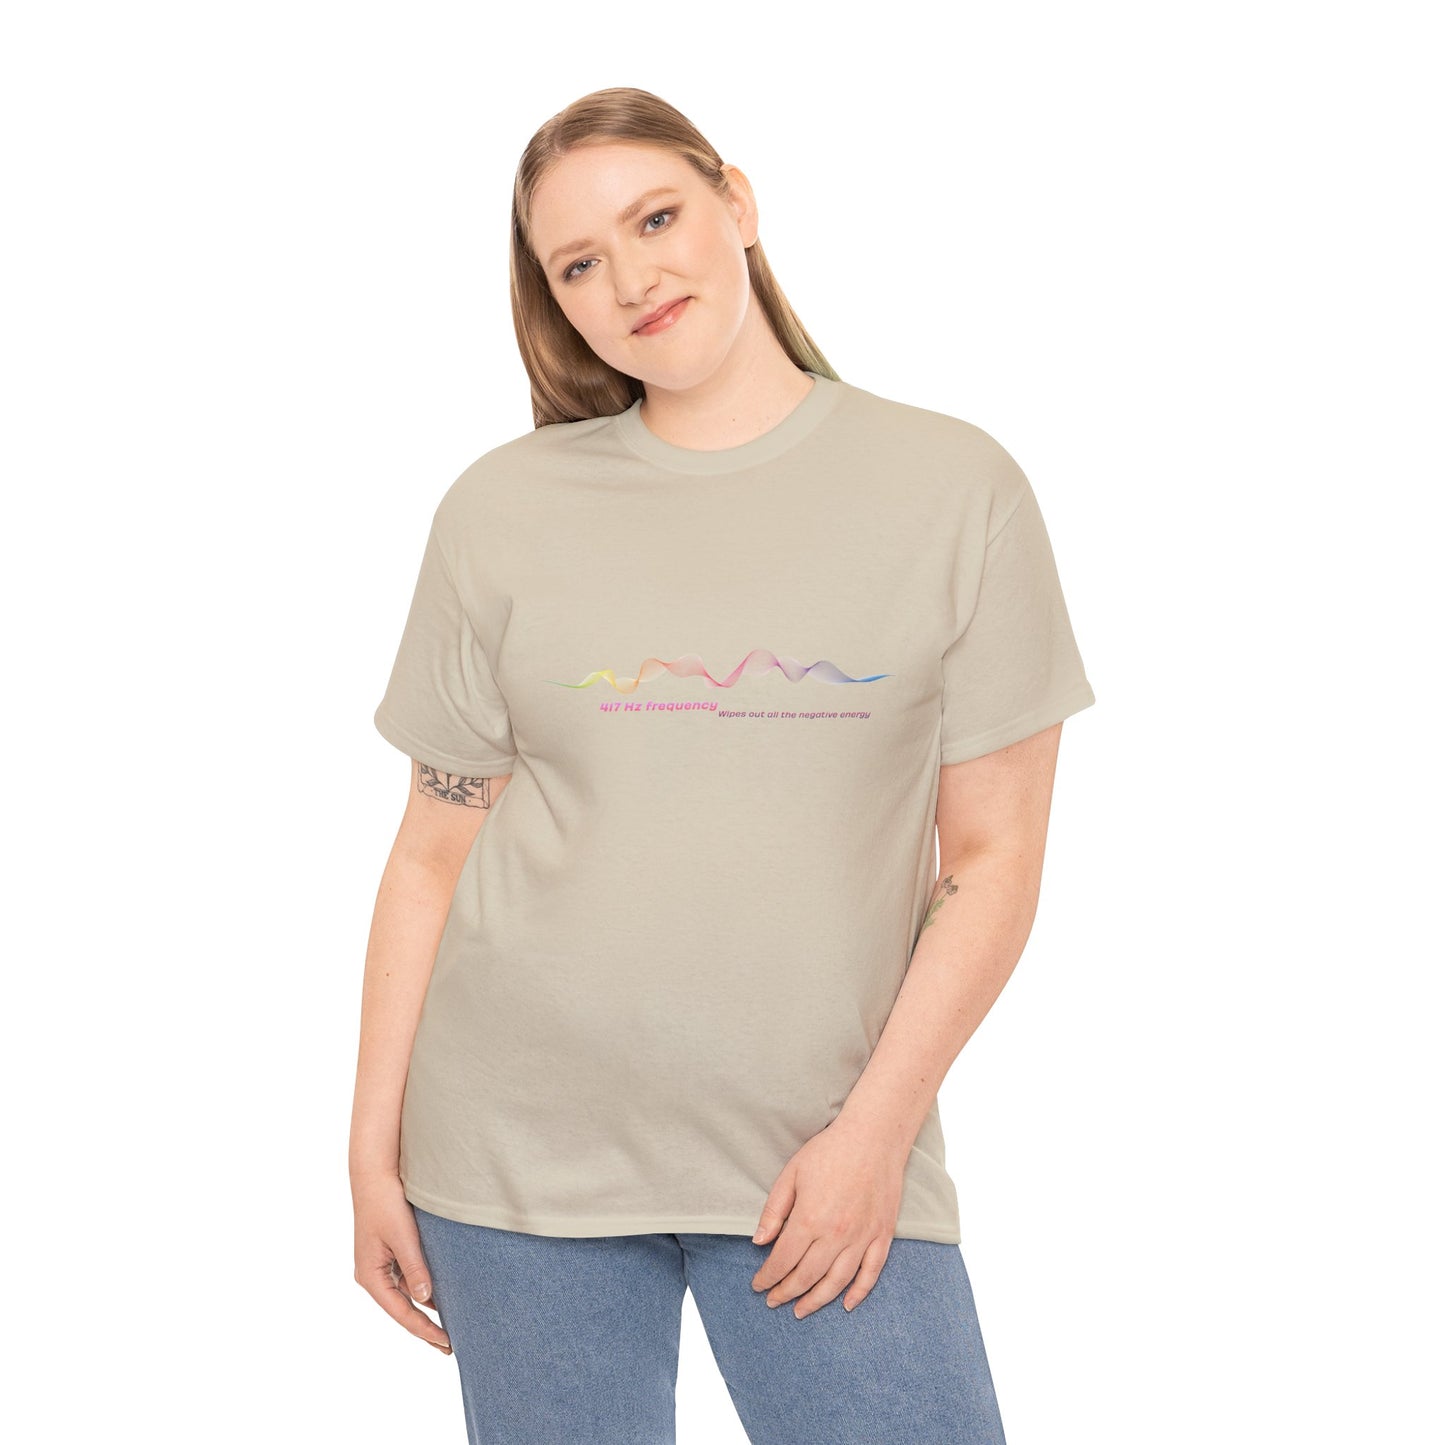 417 Hz Frequency T-Shirt